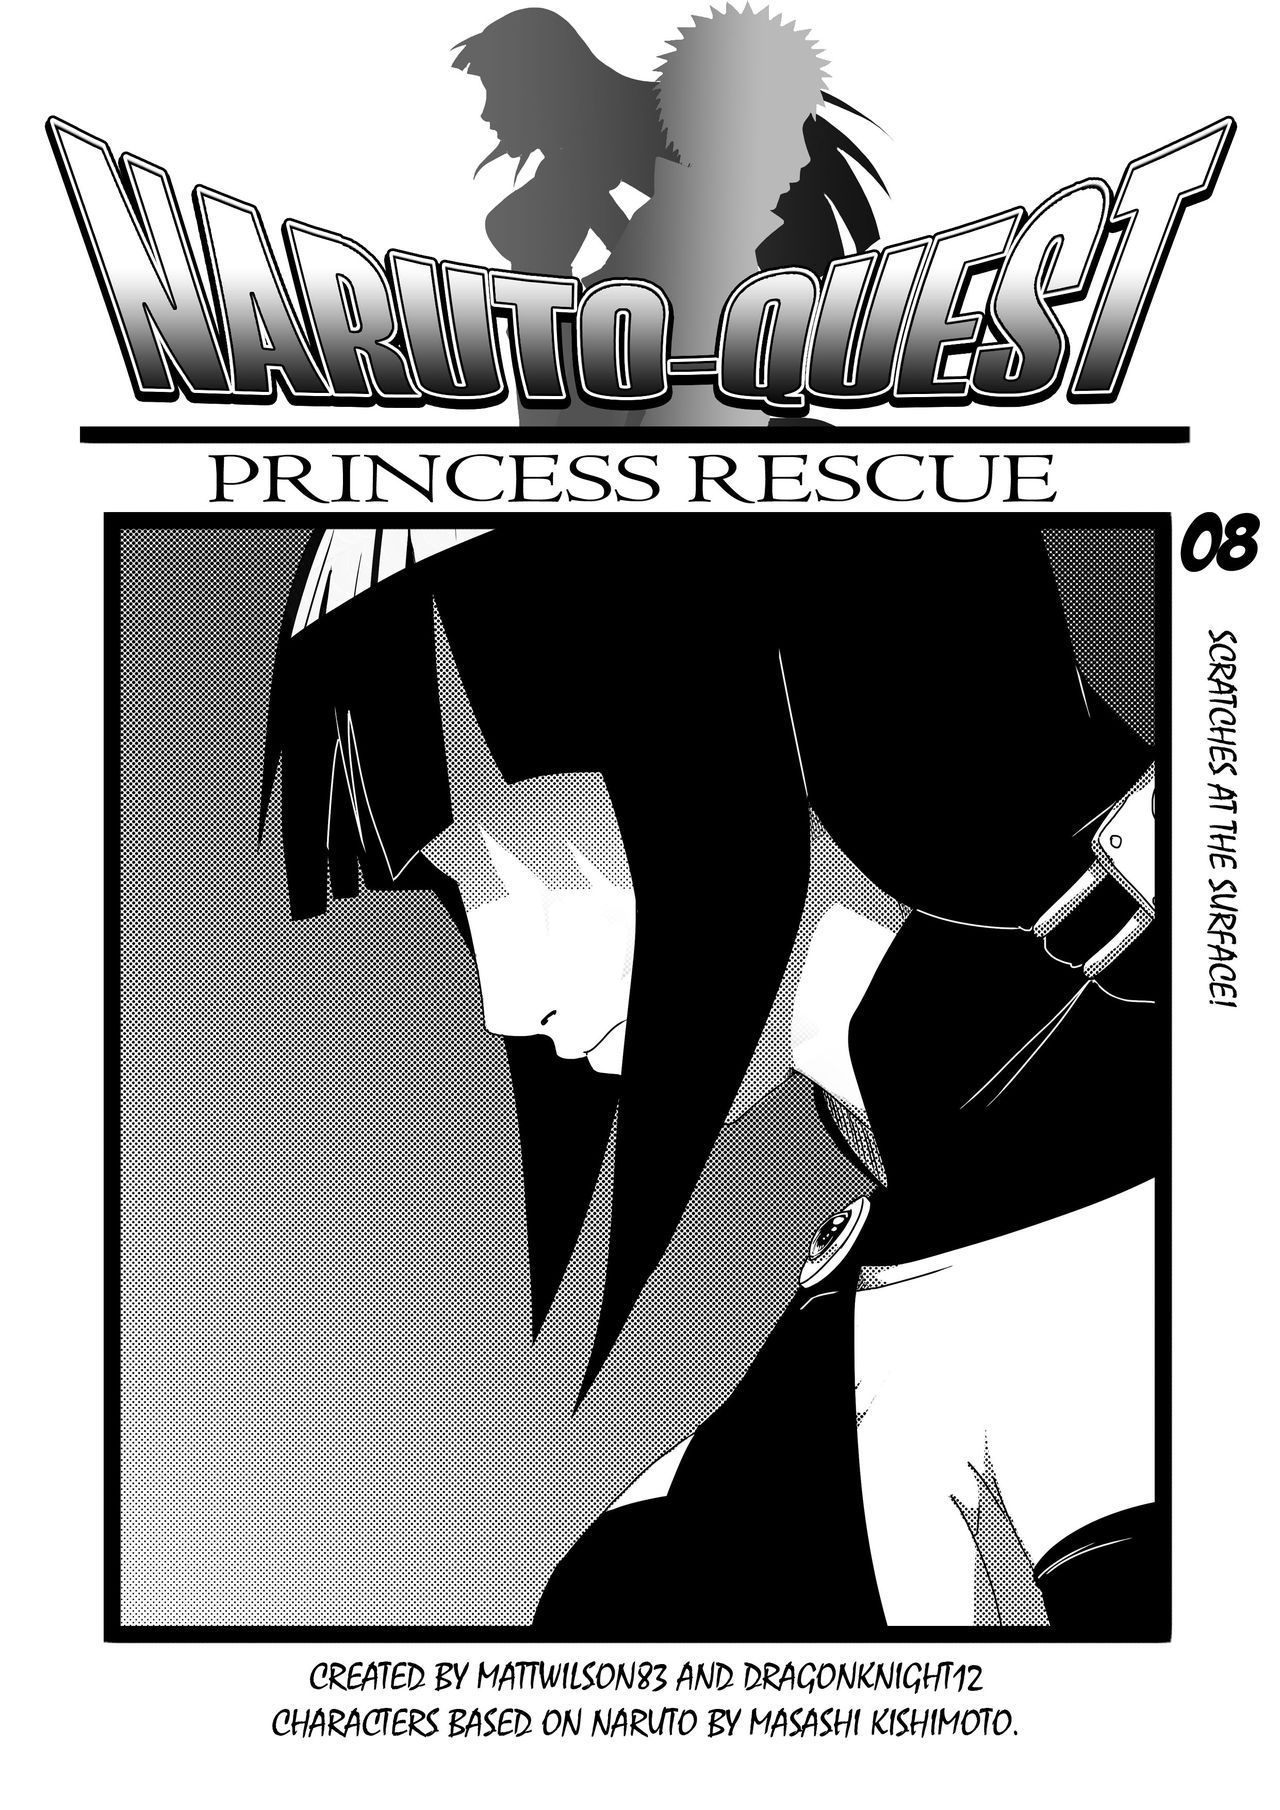 NarutoQuest: Princess Rescue 0-13(on-going) 153